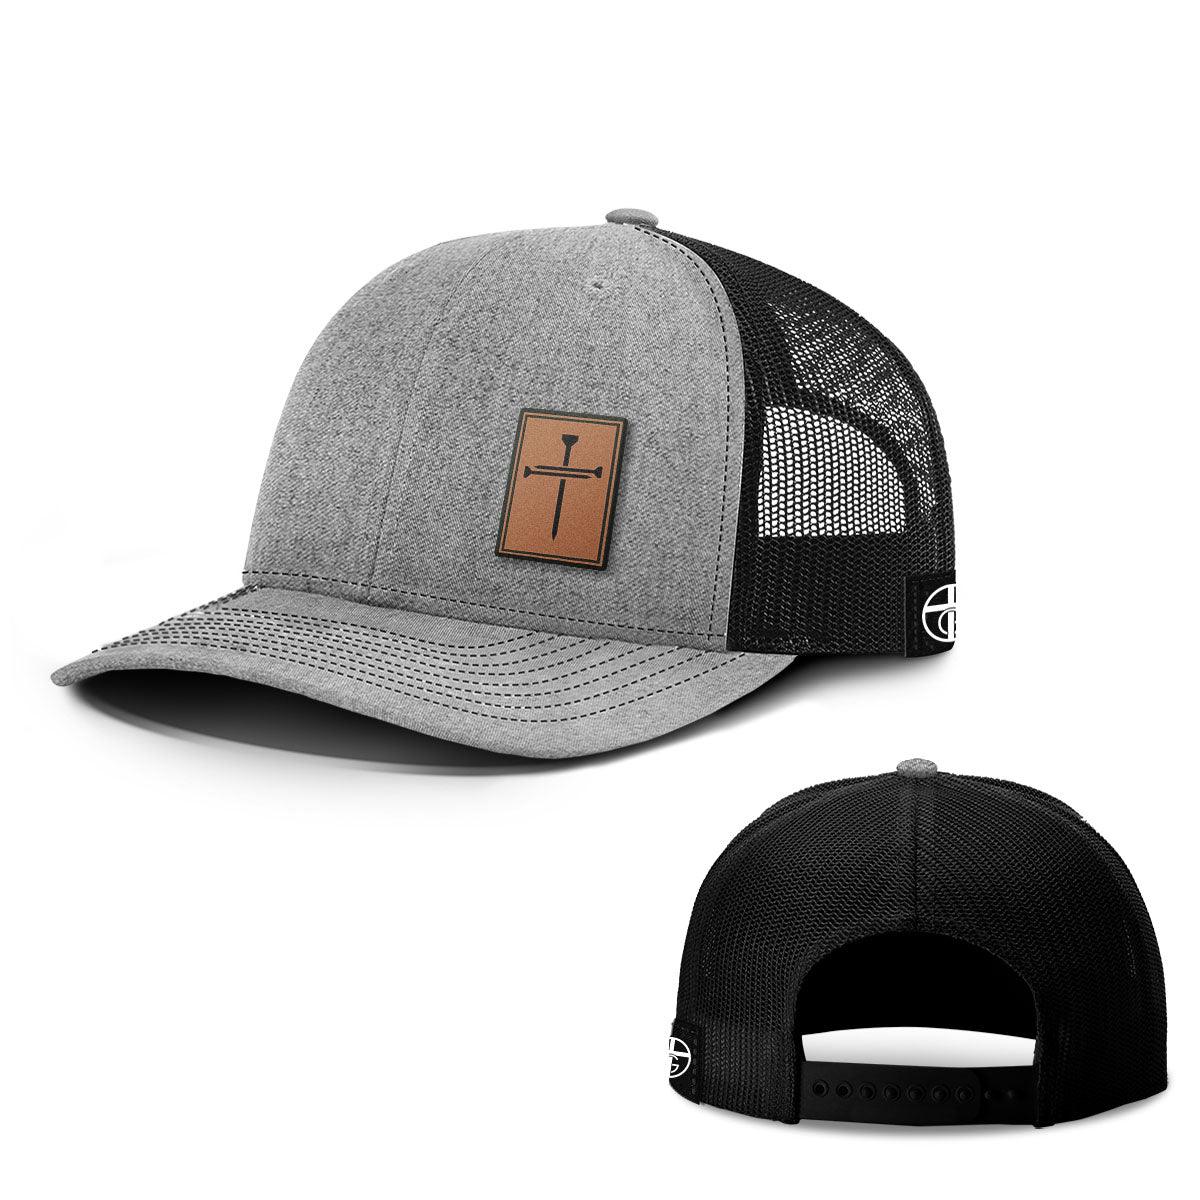 3 Nail Cross Leather Patch Hats - Our True God